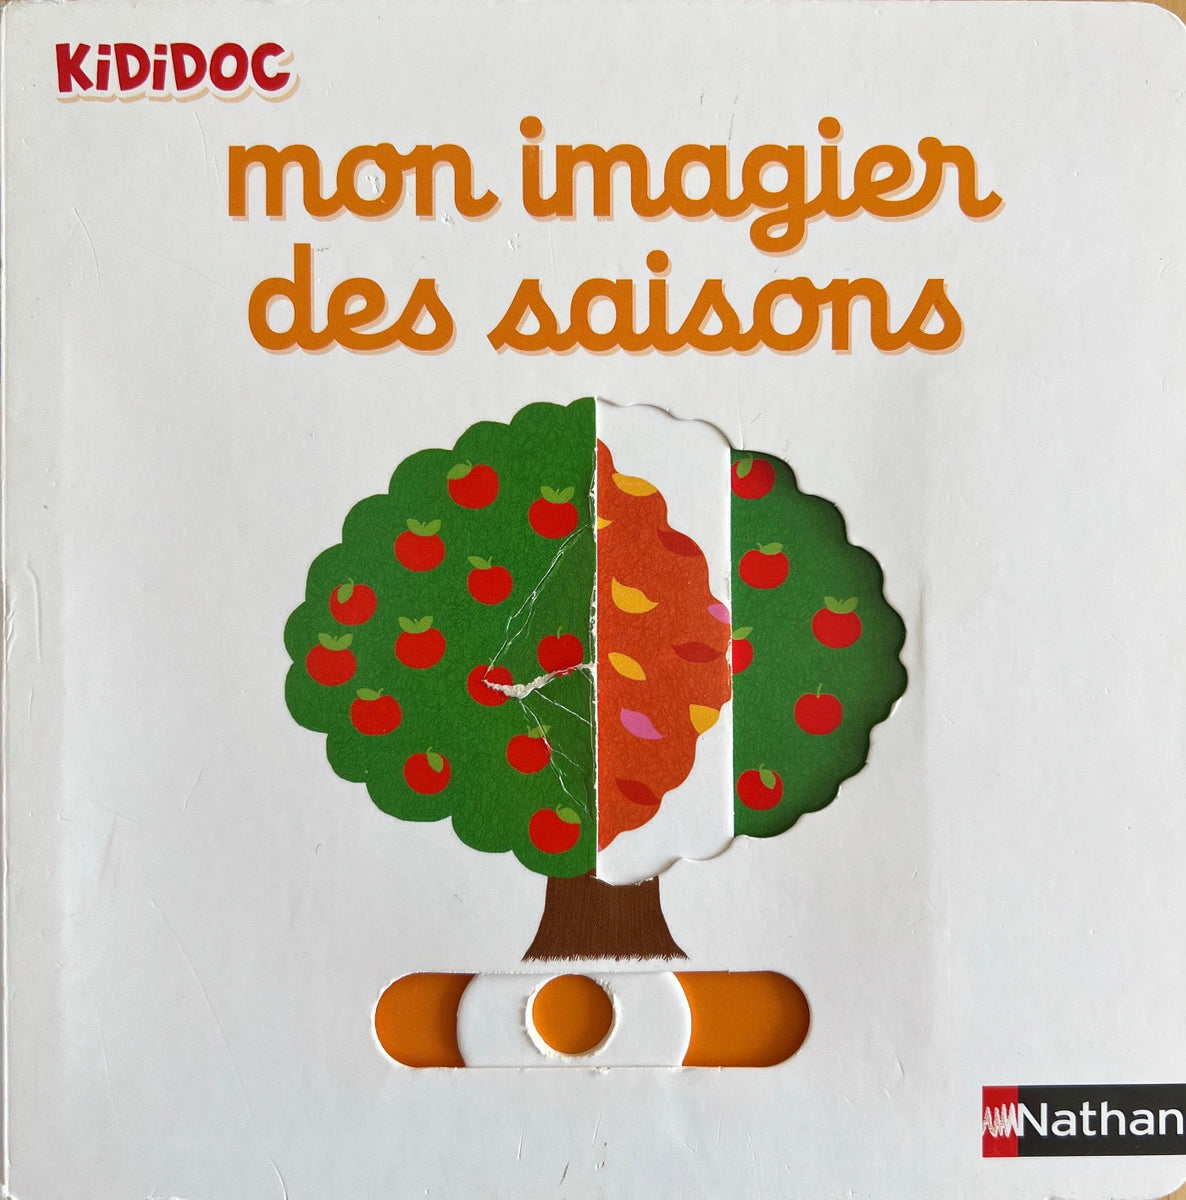 Kididoc - Mon imagier des saisons - Book in French – My French bookstore